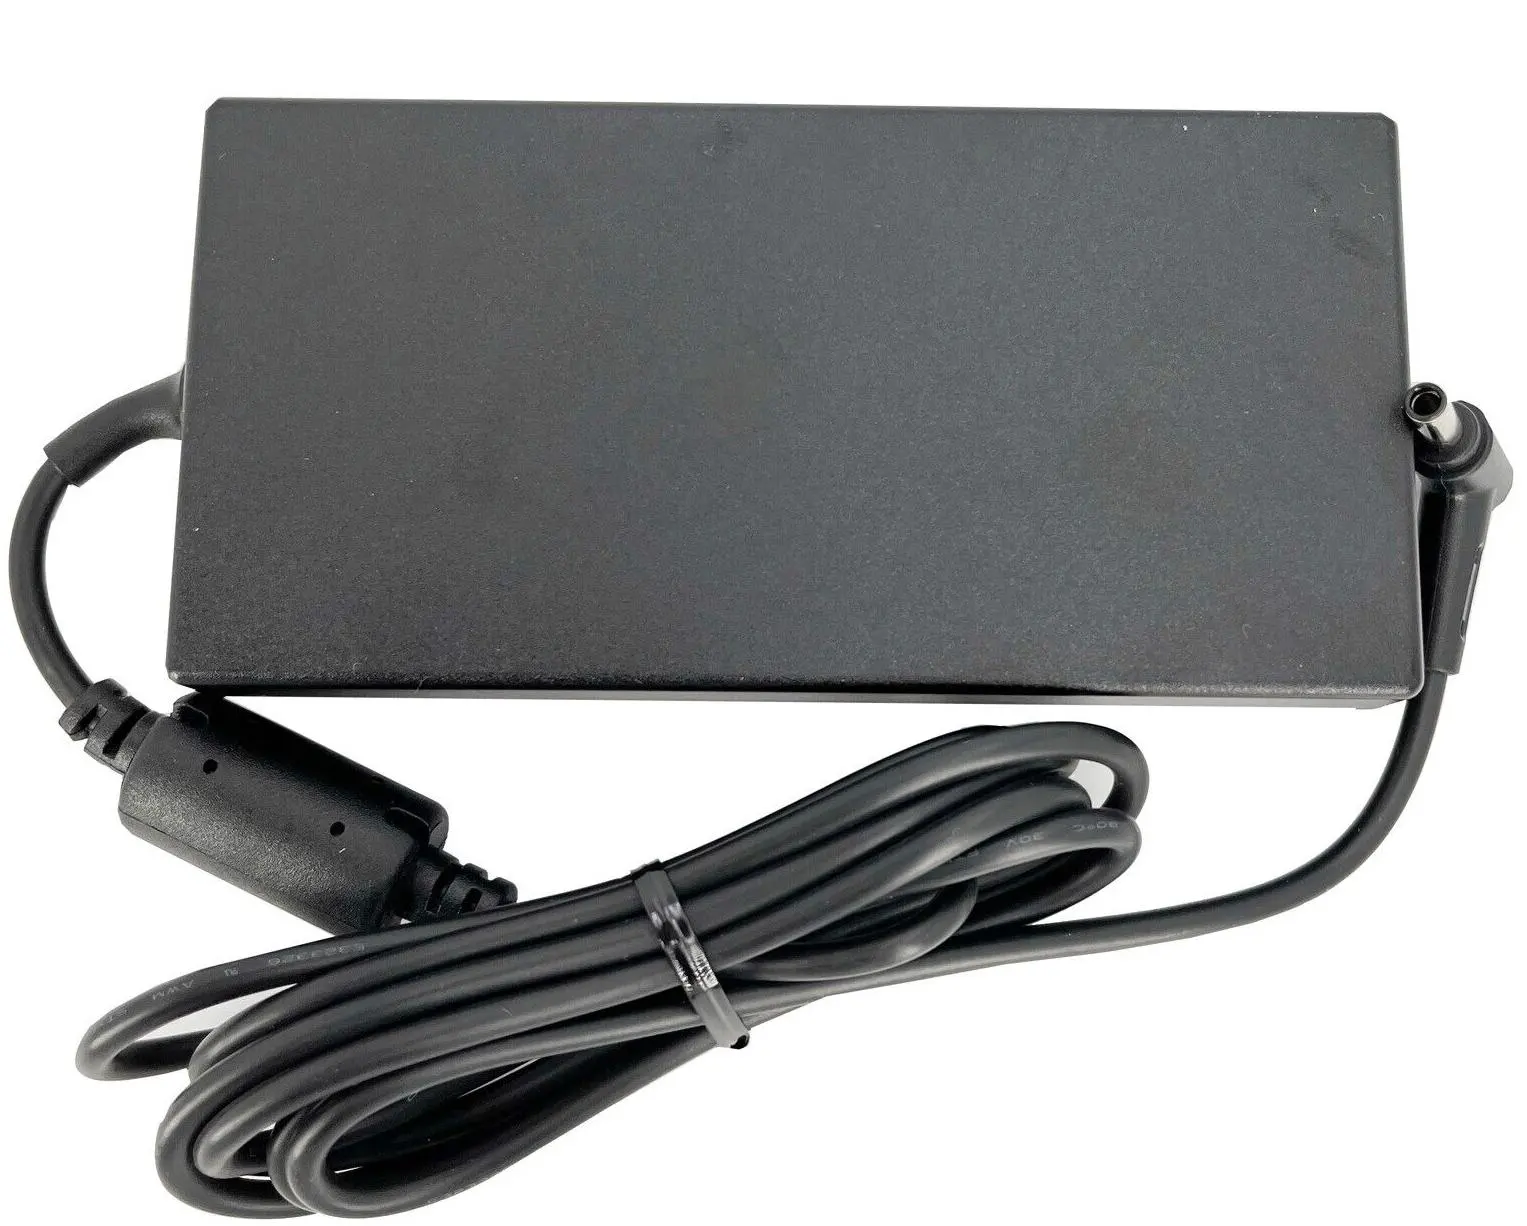 original Laptop power adapter charger delta ADP-120VH D 20v 6a for msi asus 120W